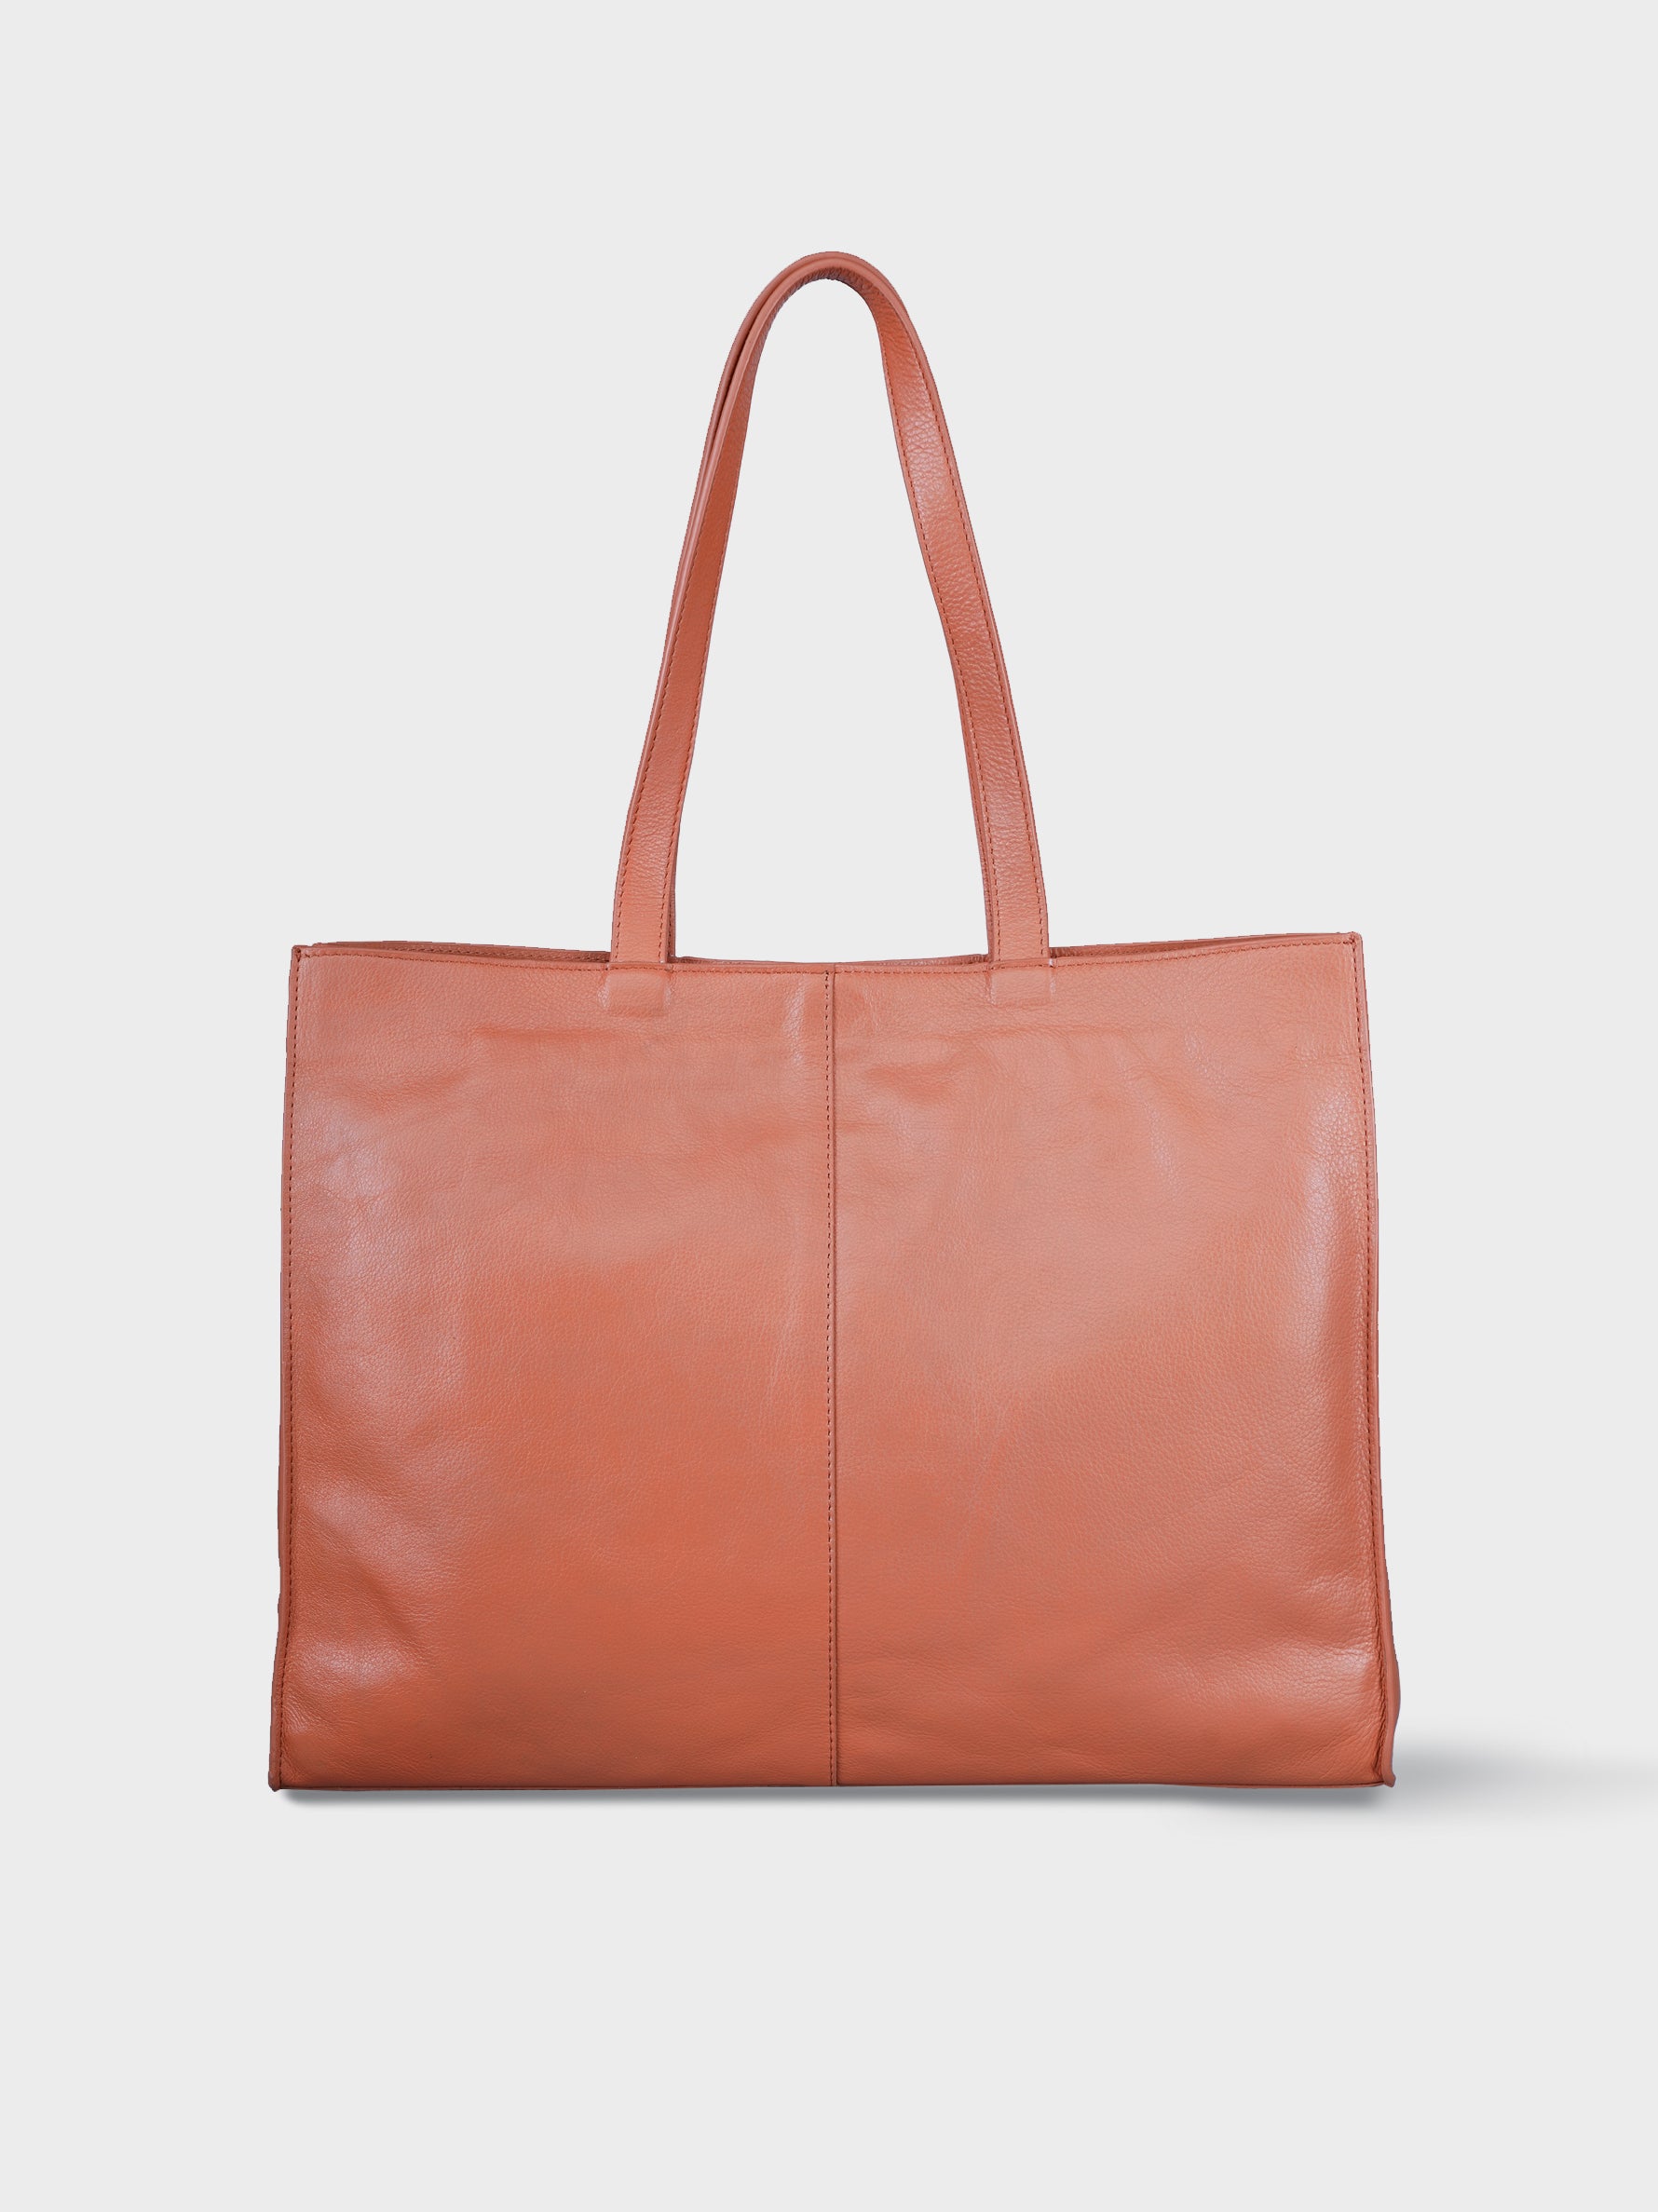 Handcrafted Genuine Vegetable Tanned Leather Artist's Tote Dusty Peach for Women Tan & Loom